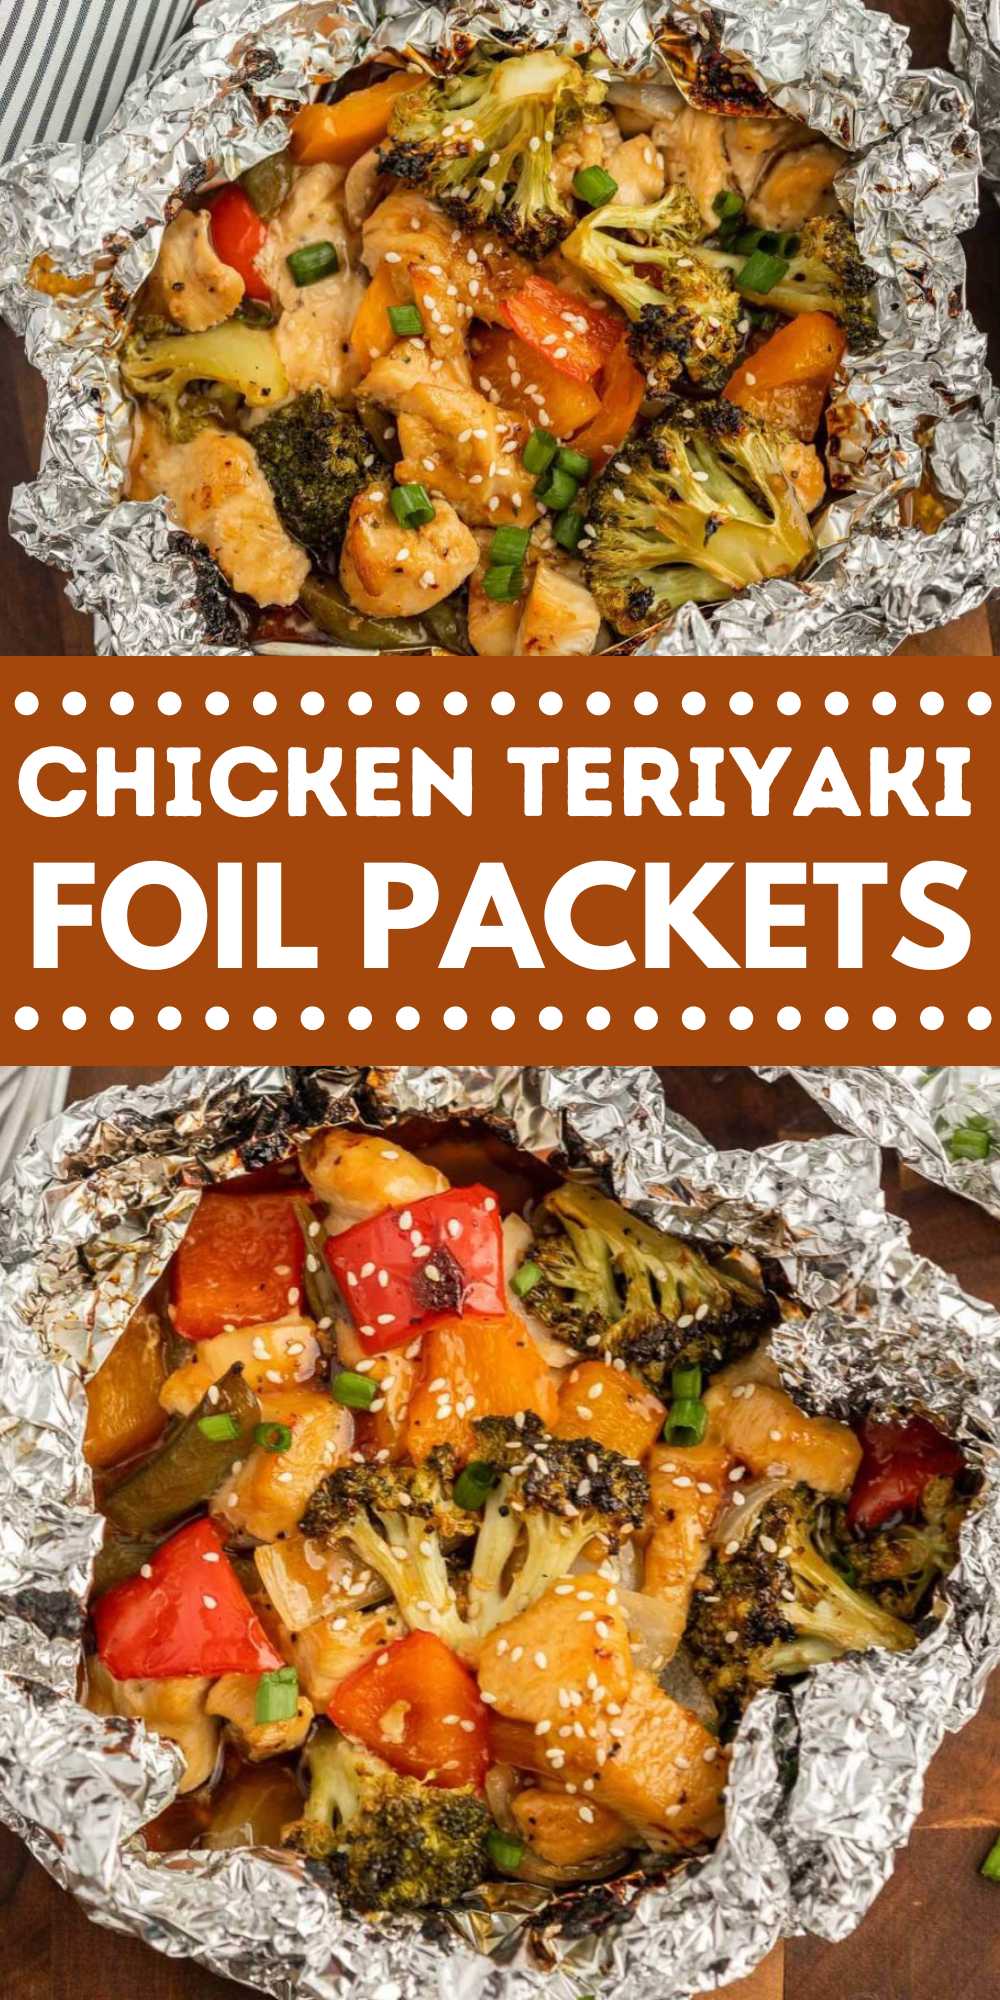 Easy Teriyaki Chicken in foil is a sweet and savory blend of tender meat and flavor packed veggies. This recipe is perfect for busy nights. We love foil pack recipes because they make dinner so easy. Cleanup is a breeze and there is minimum preparation. #eatingonadime #teriyakichickenfoilpackets #foilpackets #teriyakichicken